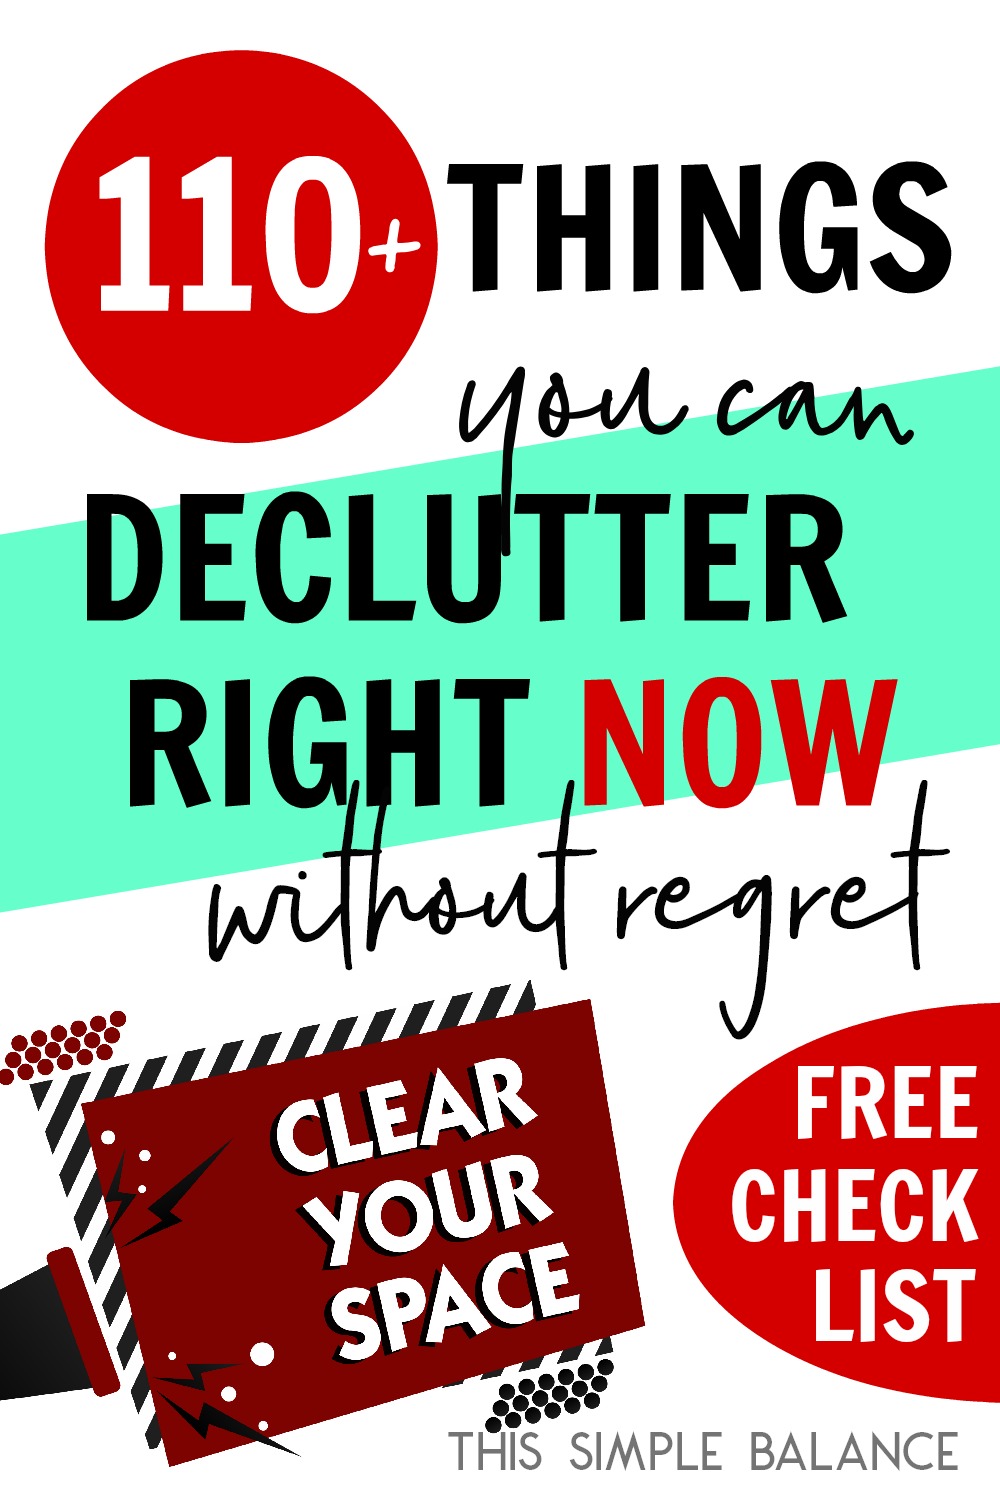 sign saying "Clear Your Space" with text overlay, "110+ things you can declutter right now without regret - free checklist"